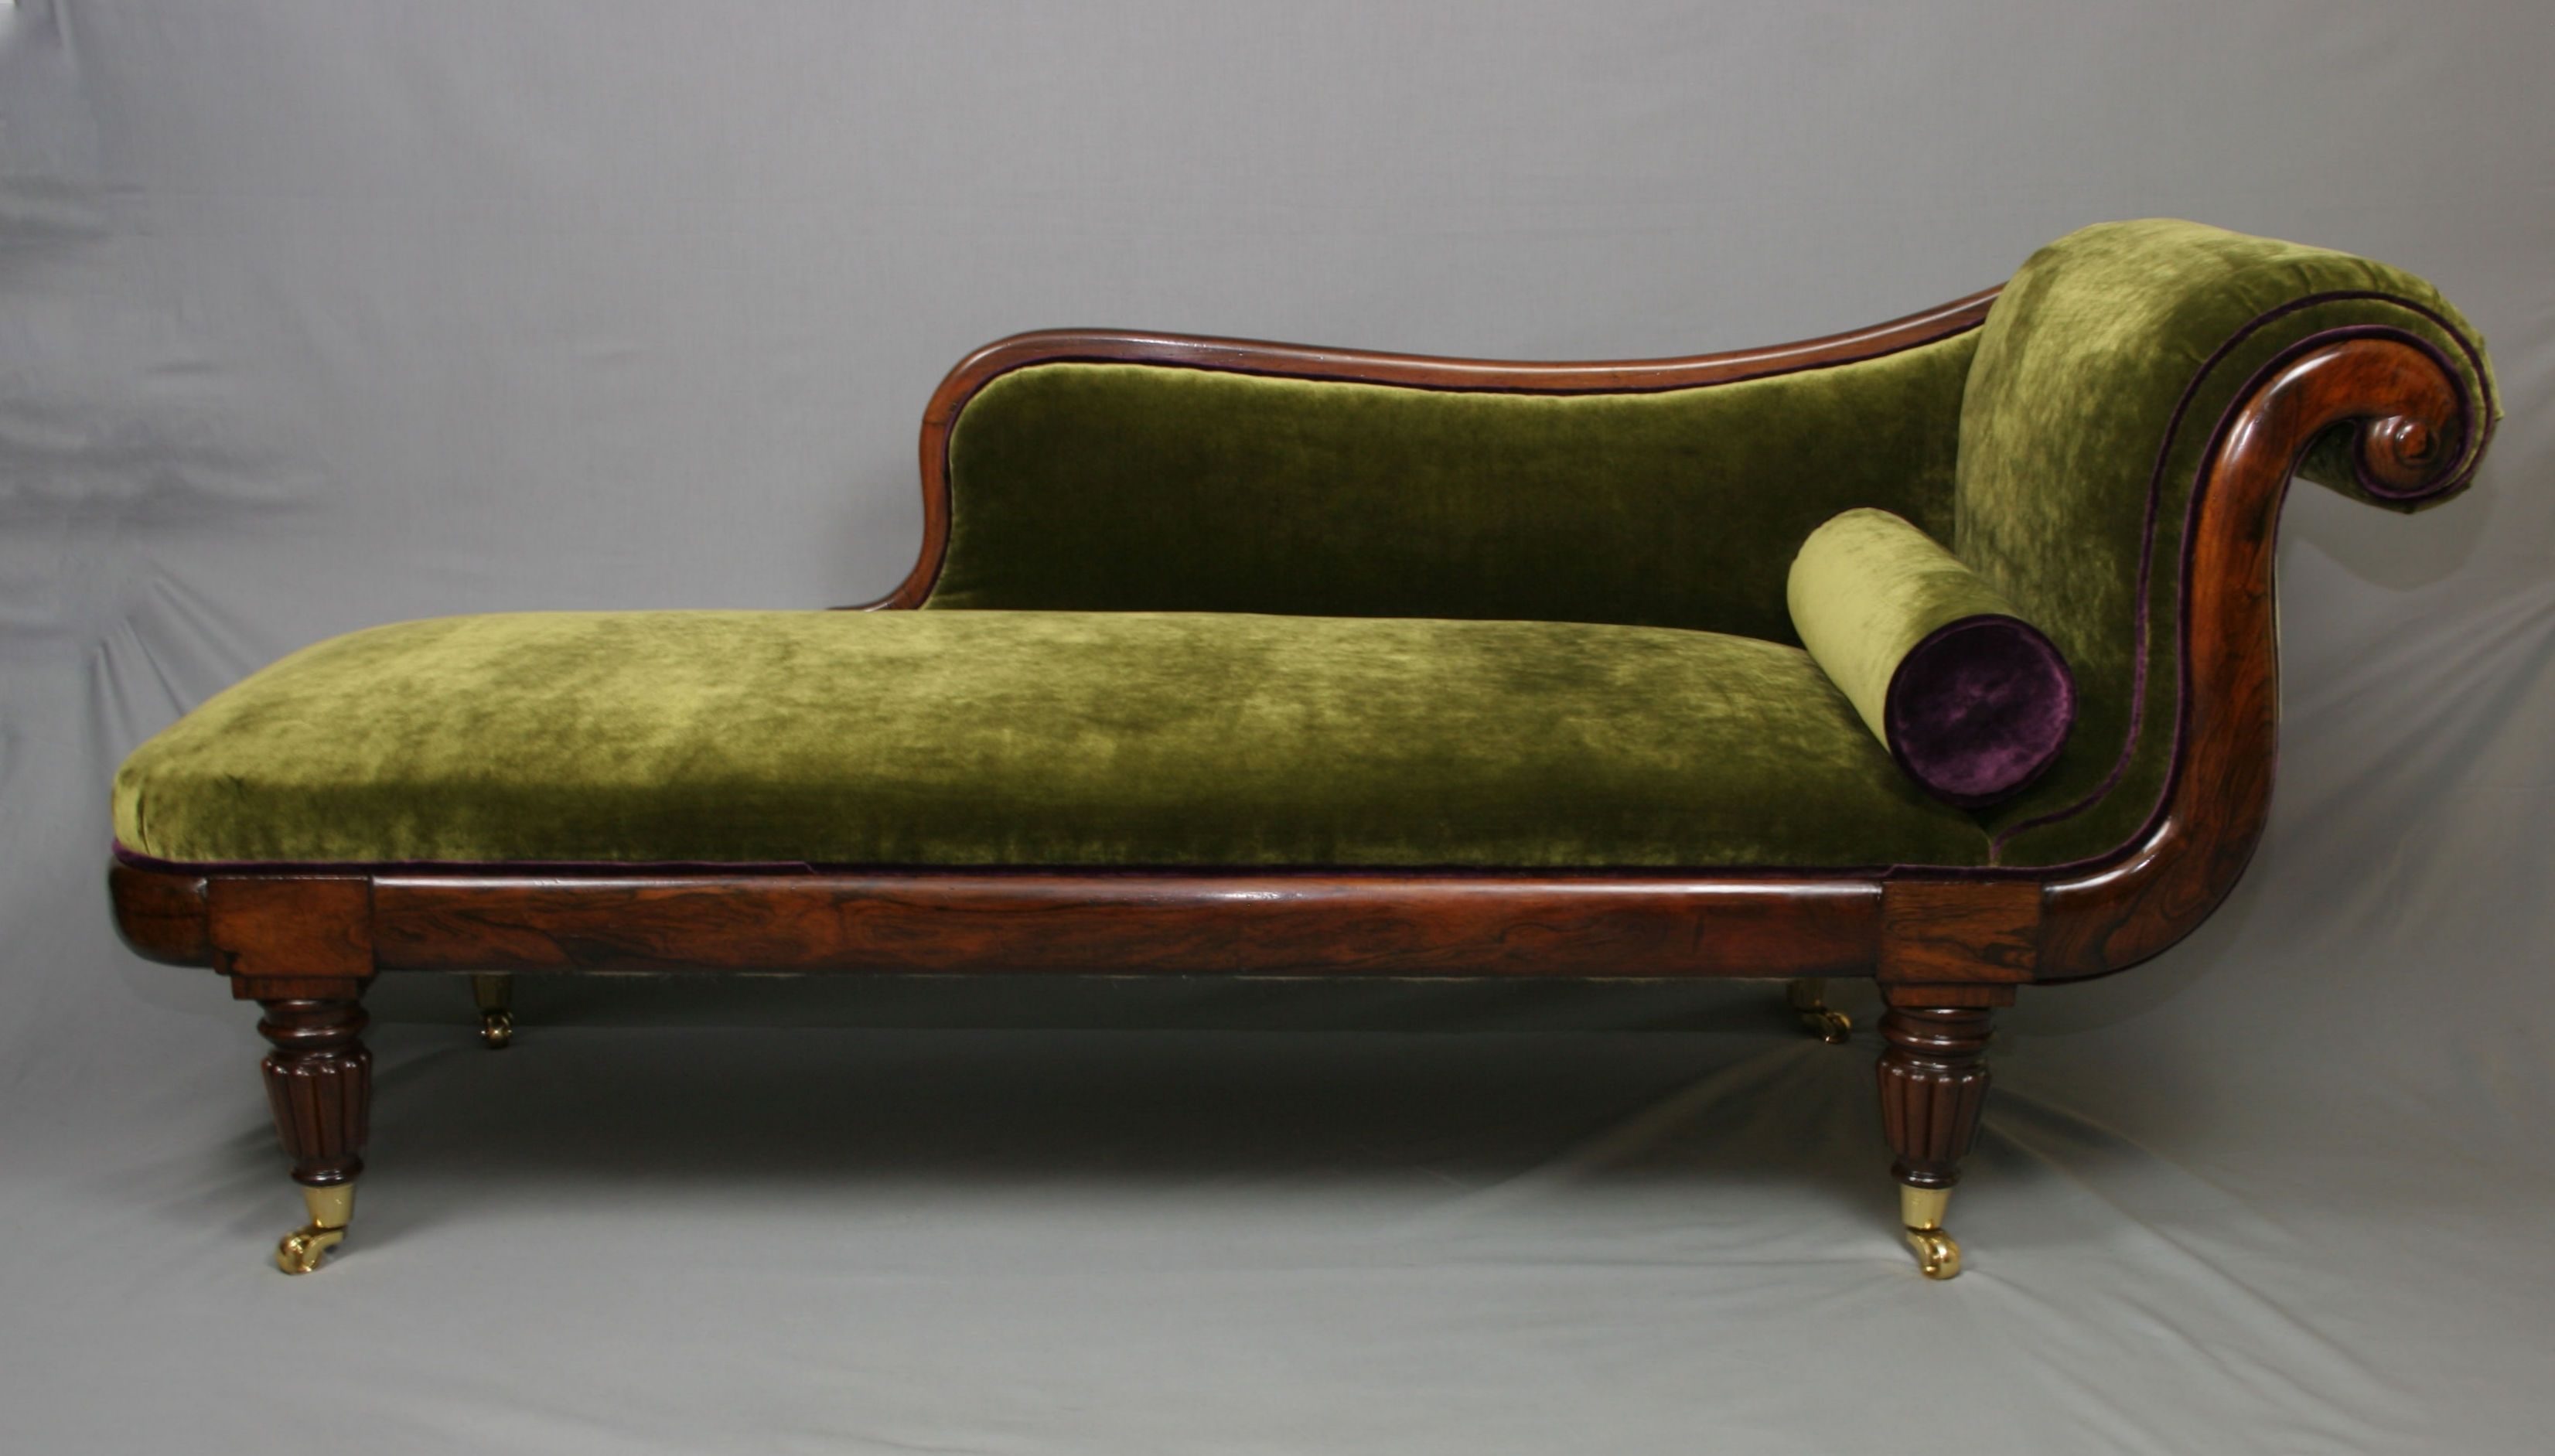 Antique Chaise Lounges Pertaining To Fashionable Antique Chaise Lounge For Sale (View 5 of 15)